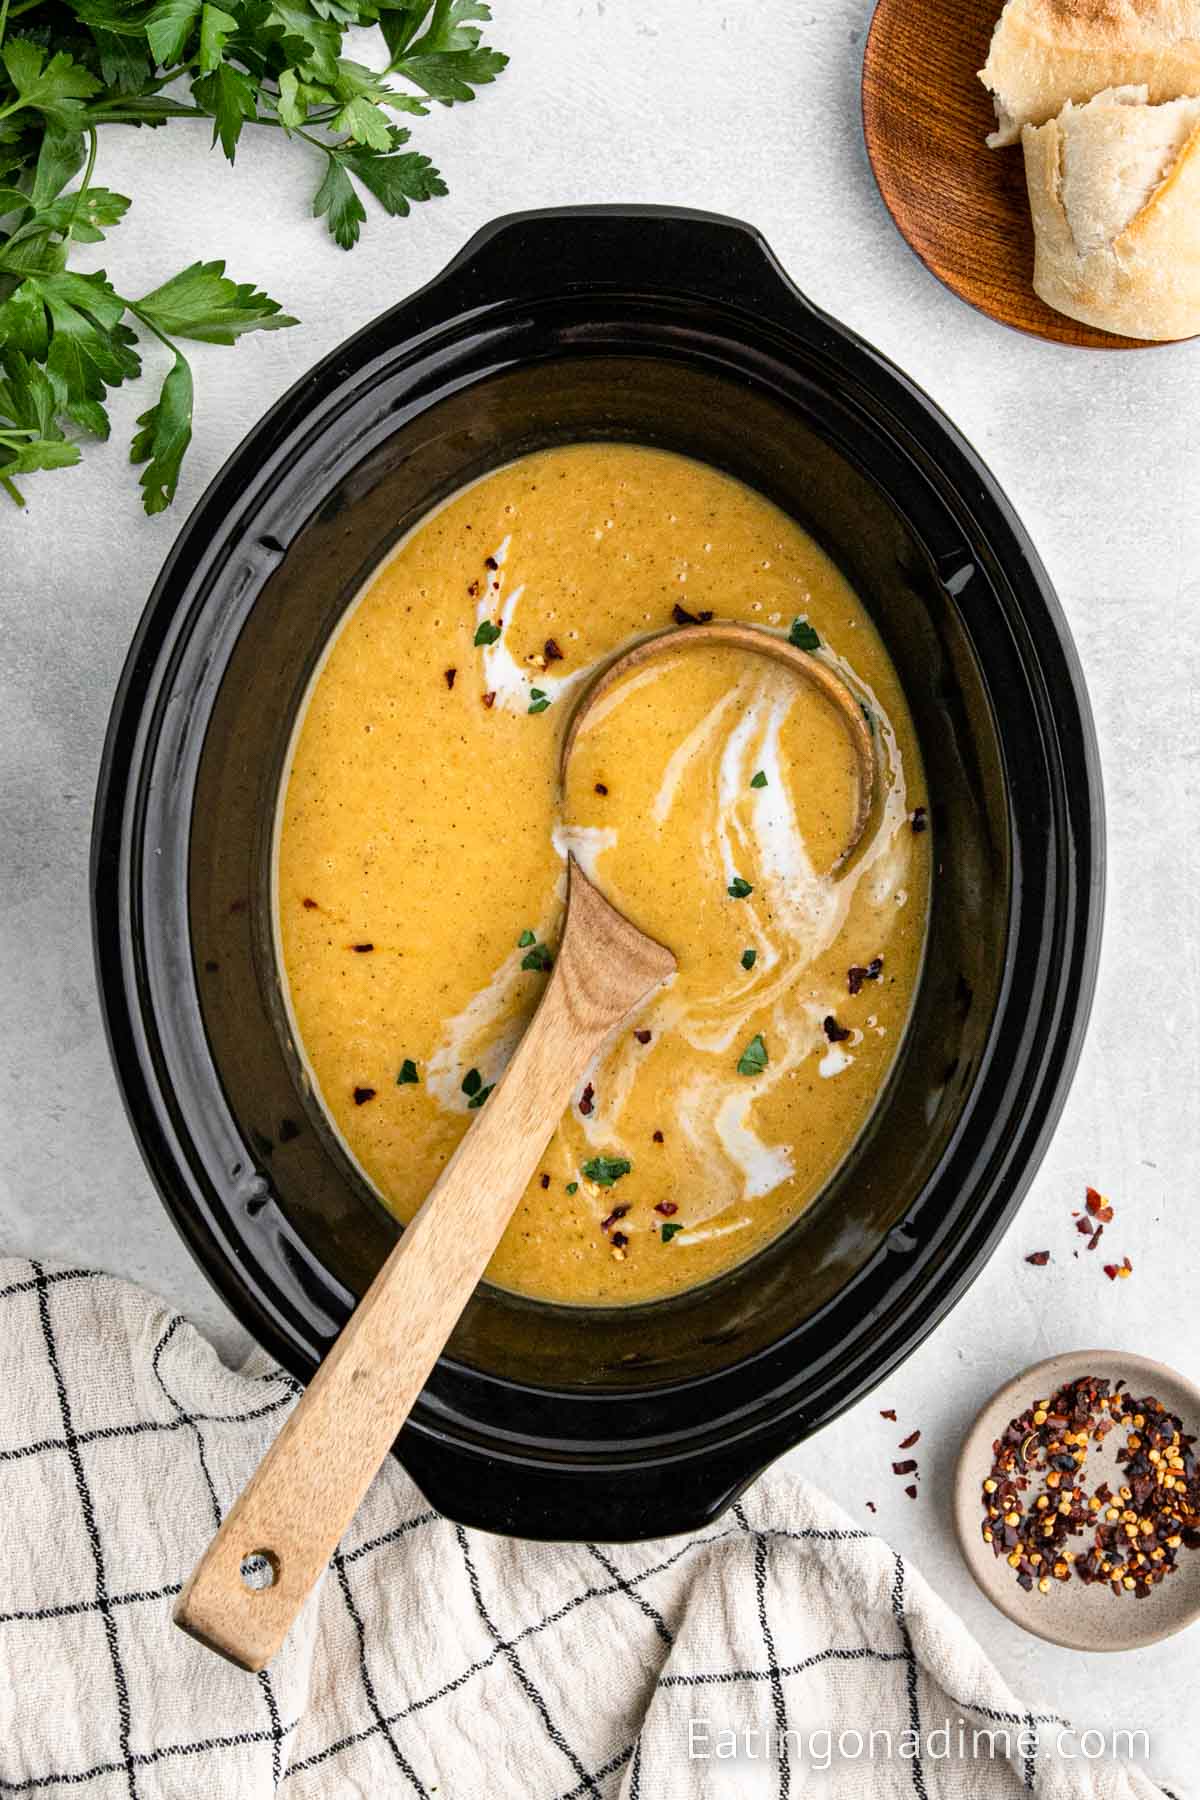 Butternut squash in the slow cooker with a ladle